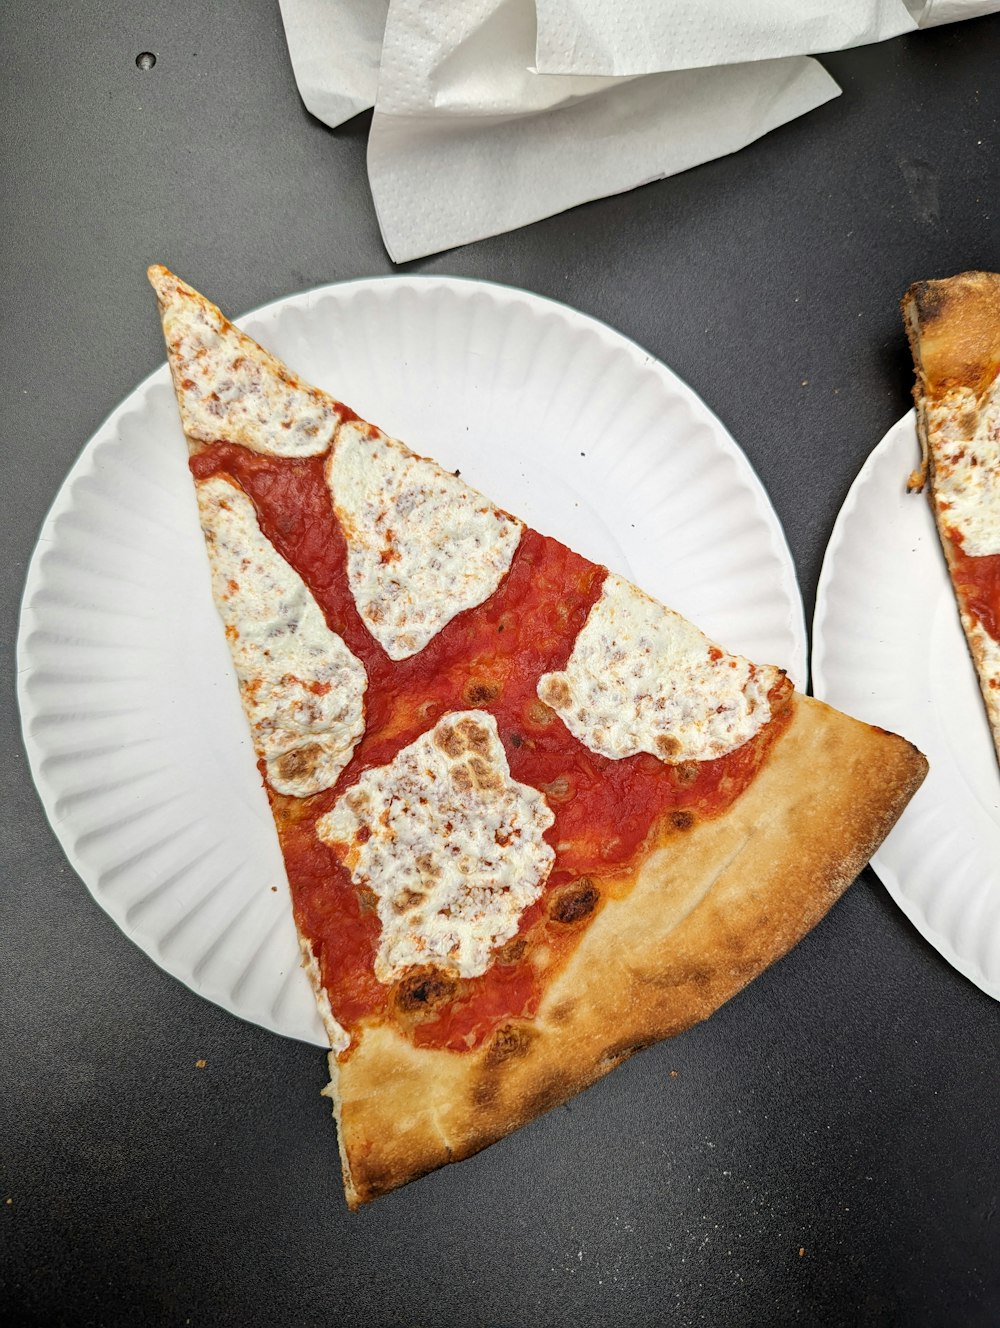 two slices of pizza on paper plates on a table